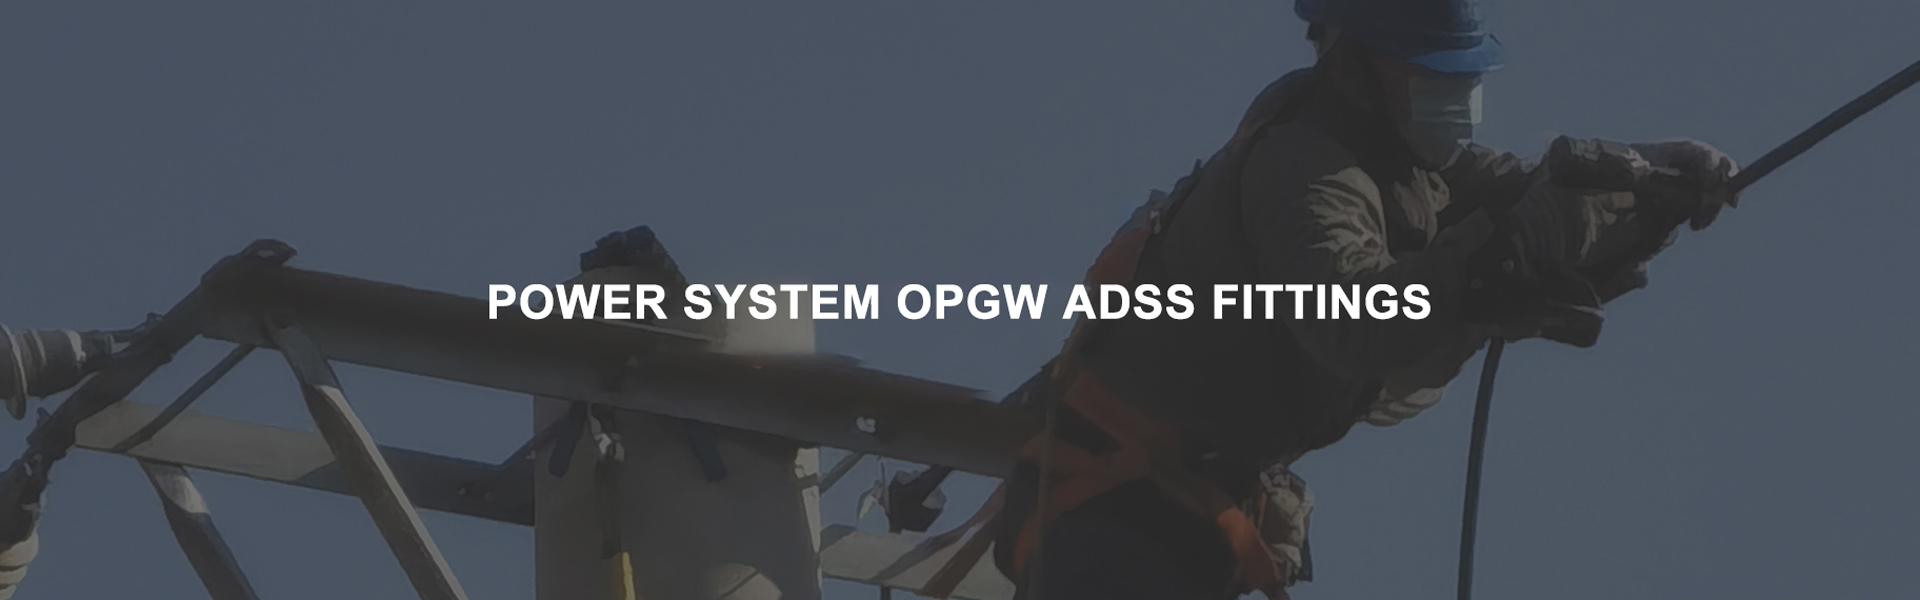 OPGW/ADSS/OPPC